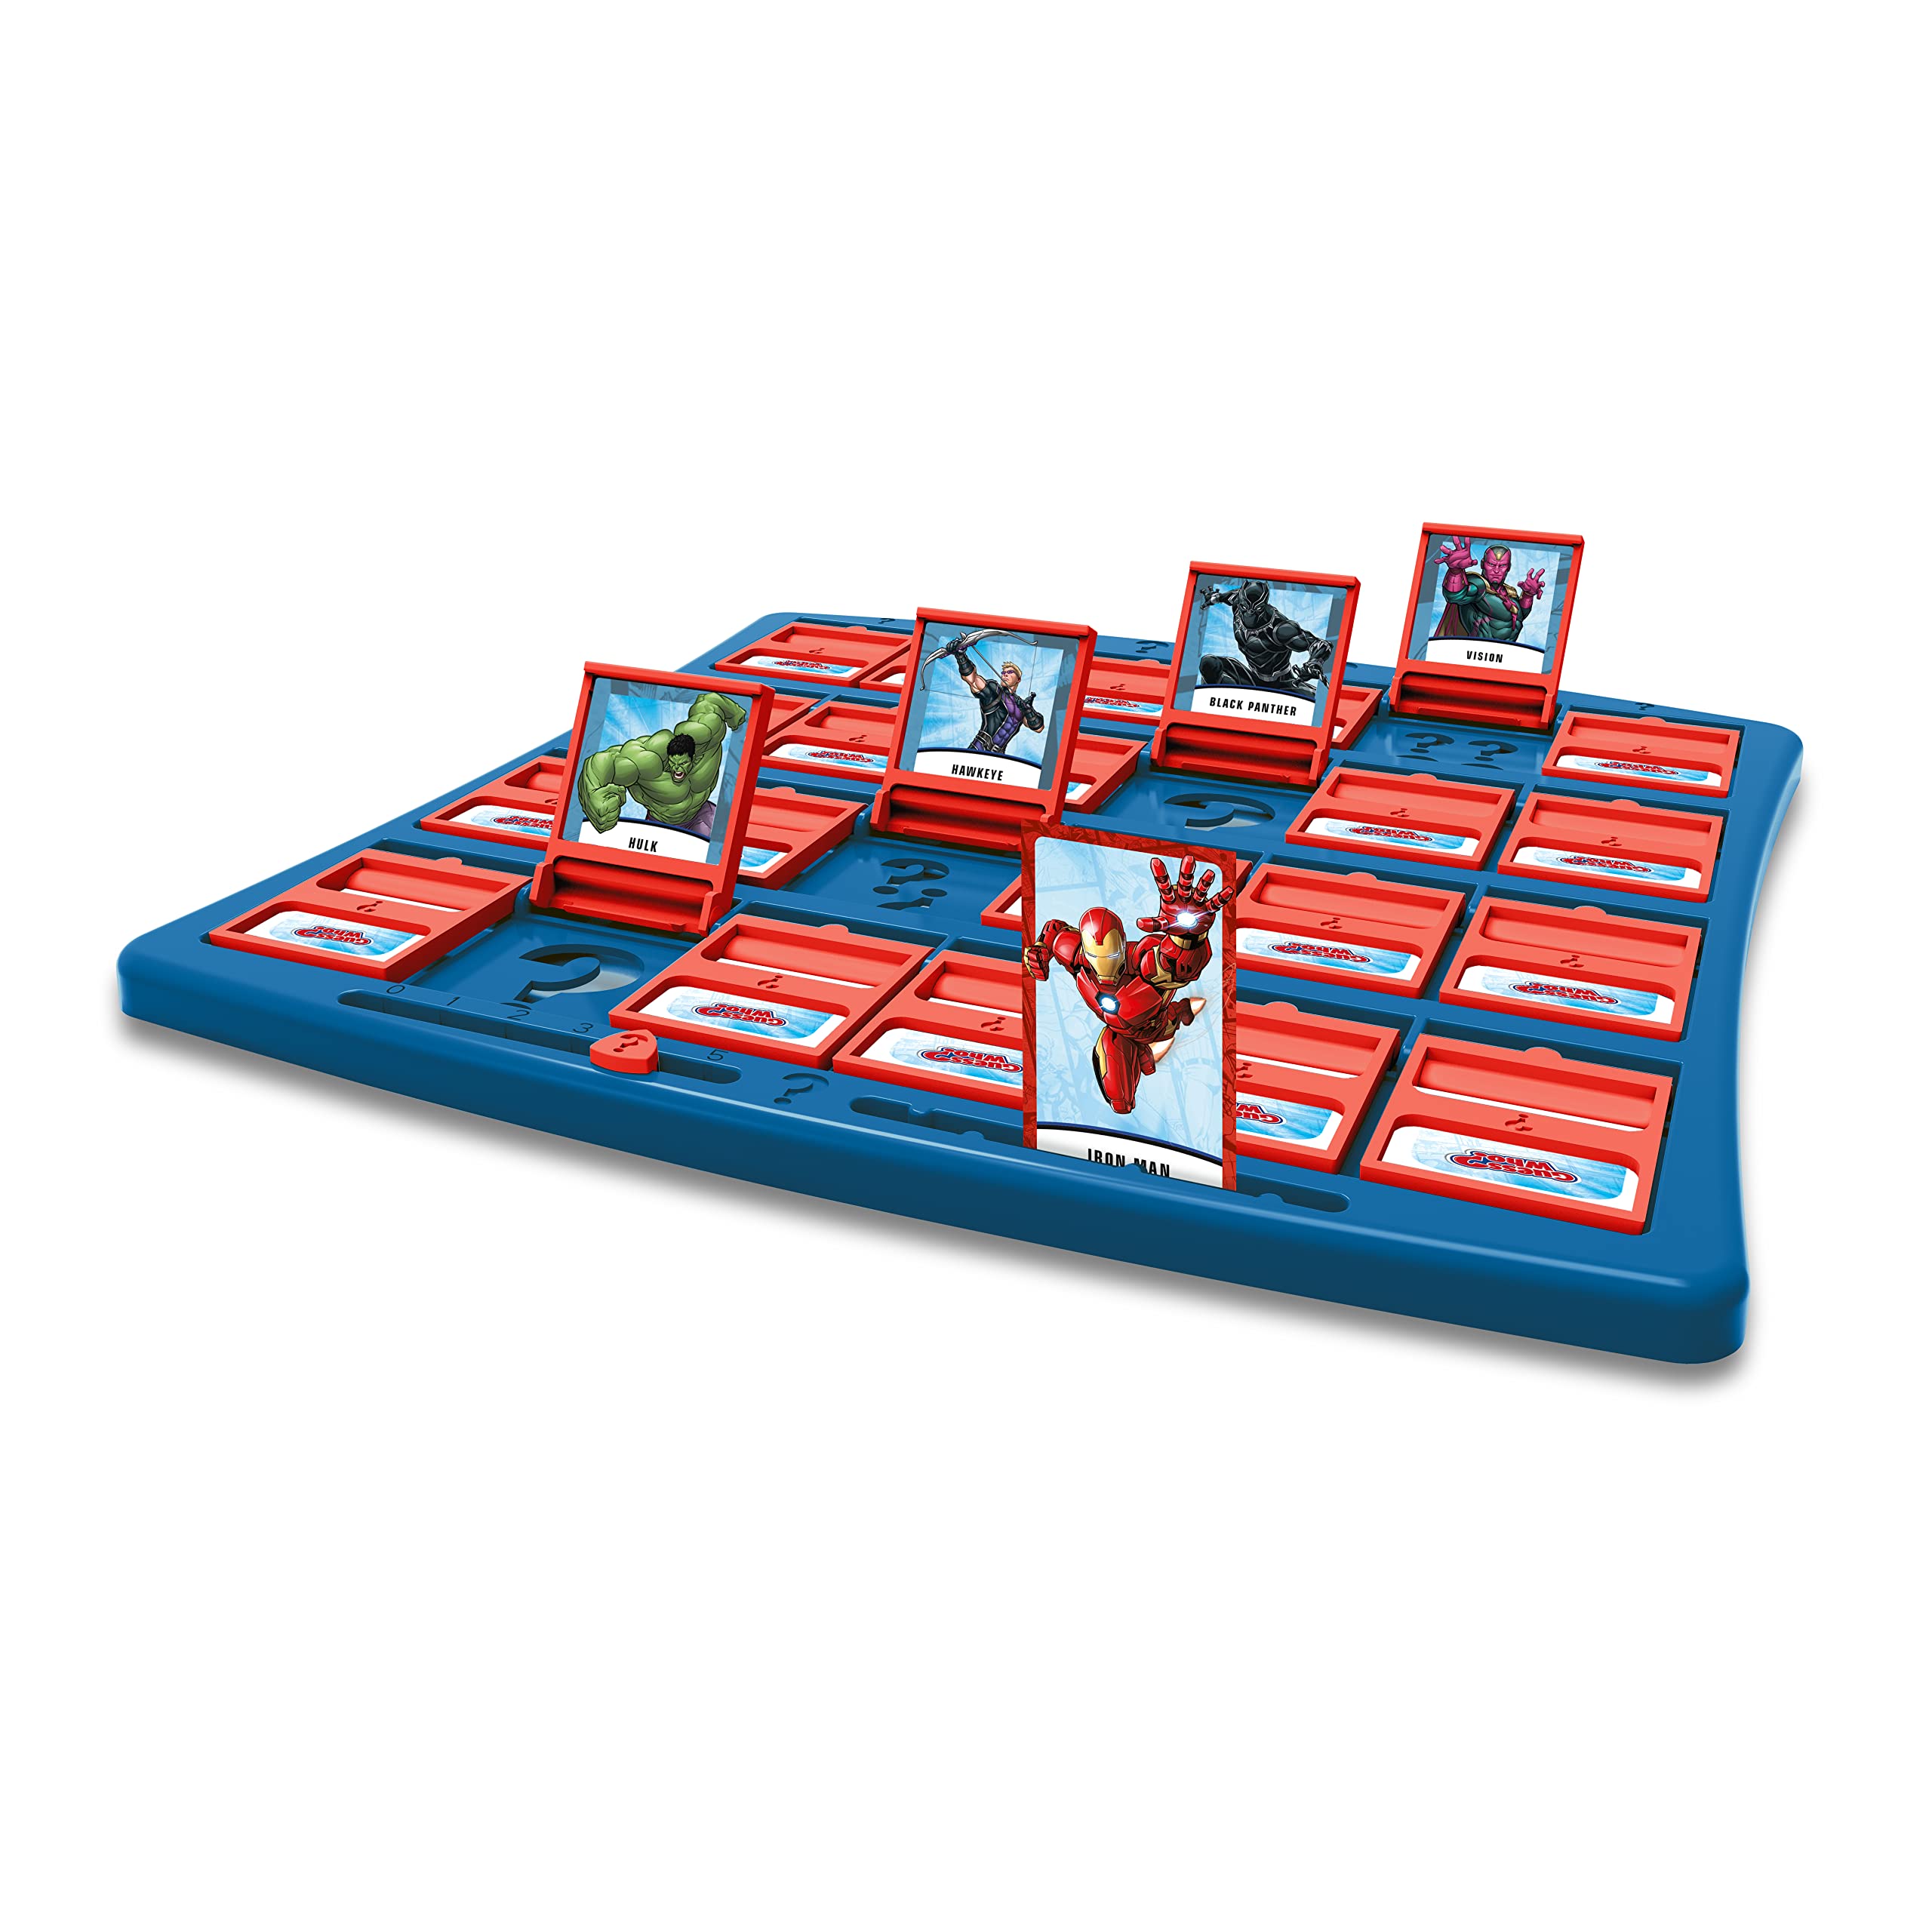 Winning Moves Marvel Guess Who? Board Game, The Avengers, Guardians of the Galaxy and Wakanda forces are included from Hulk, Iron Man, Black Widow, Black Panther, Rocket, great gift for ages 6 plus